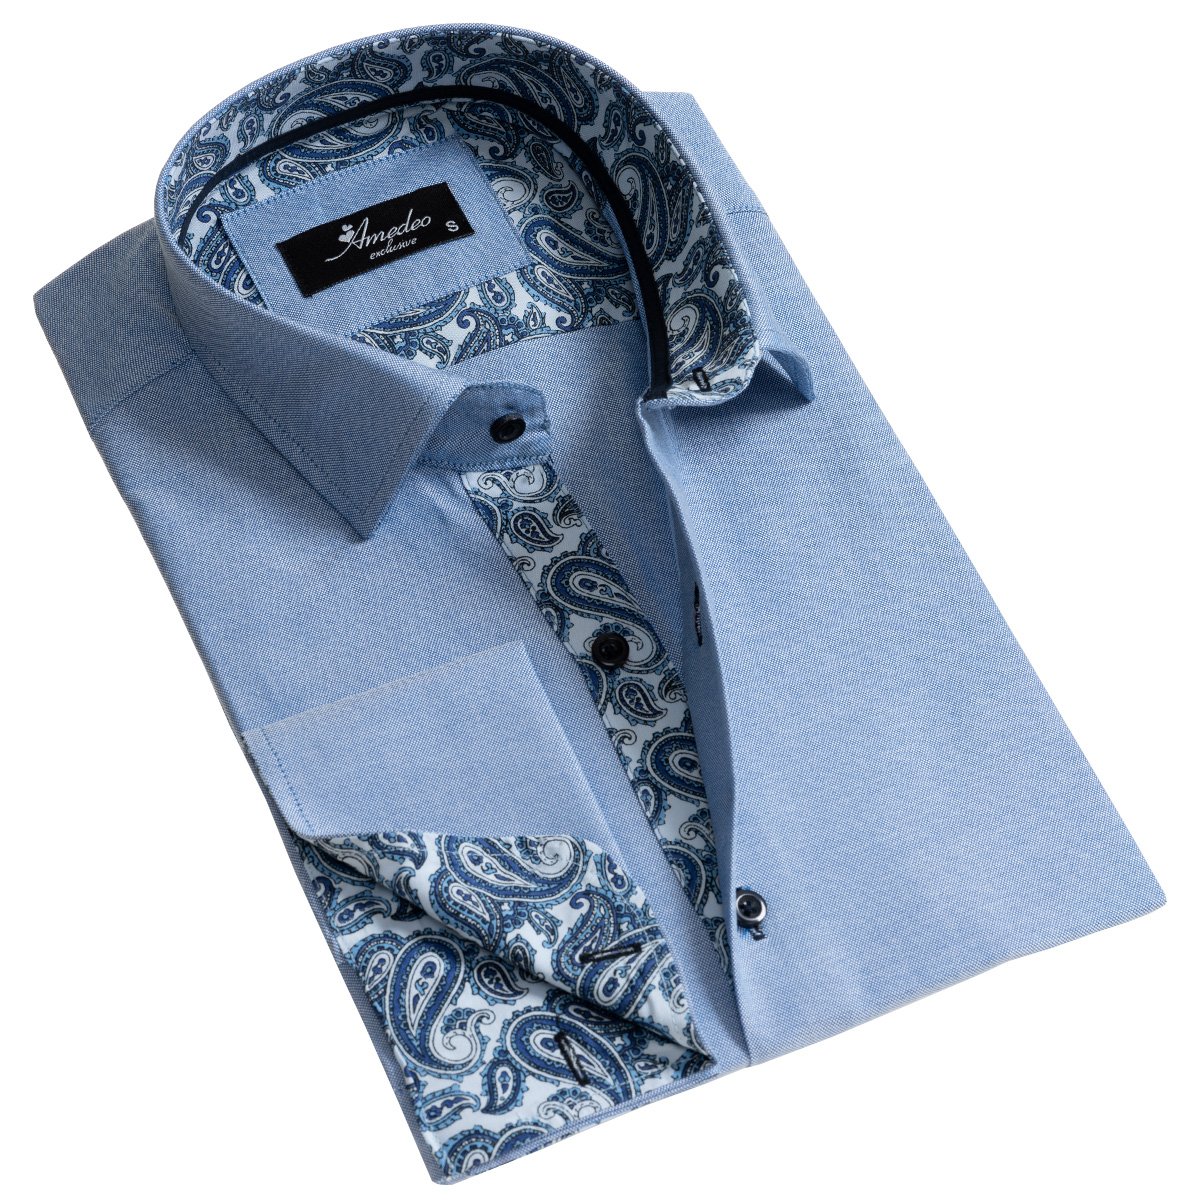 Blue Men's Slim Fit French Cuff Dress Shirts with Cufflink Holes - Casual and Formal - Amedeo Exclusive